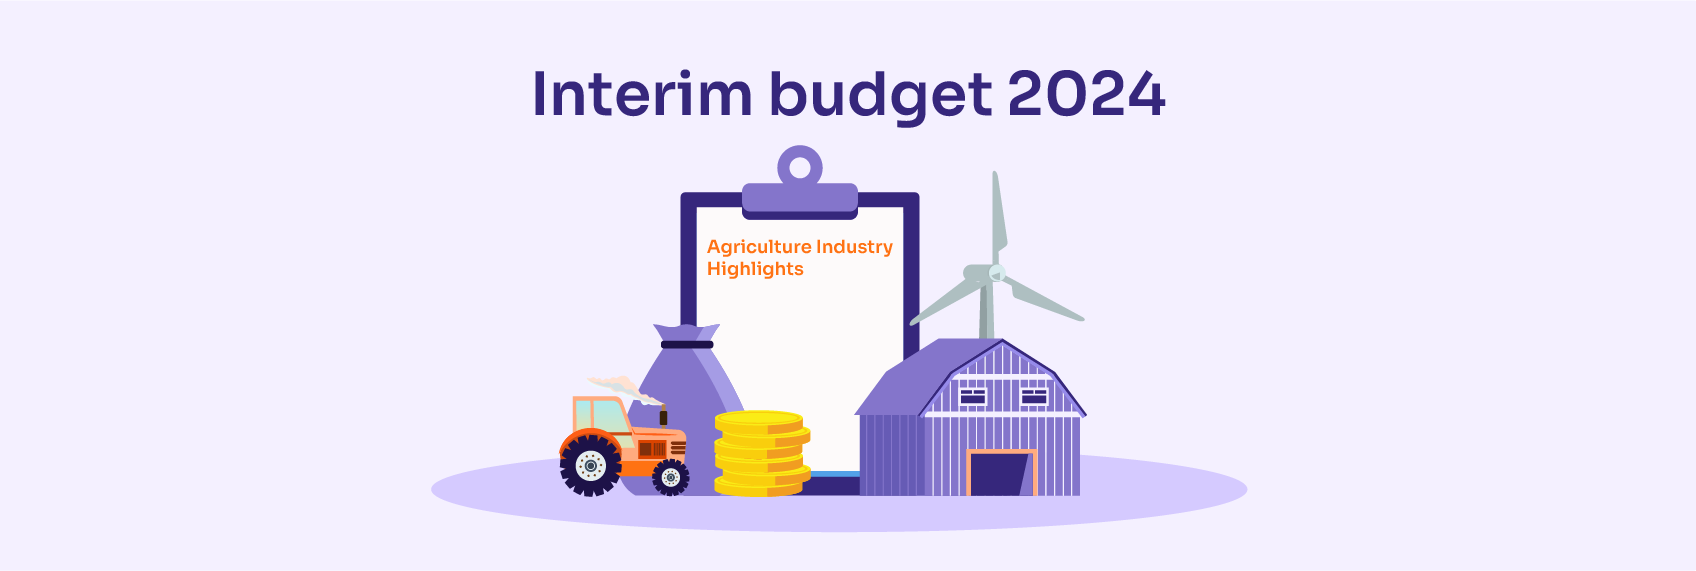 Interim Budget 2024 agriculture, dairy, and fishing industry highlights